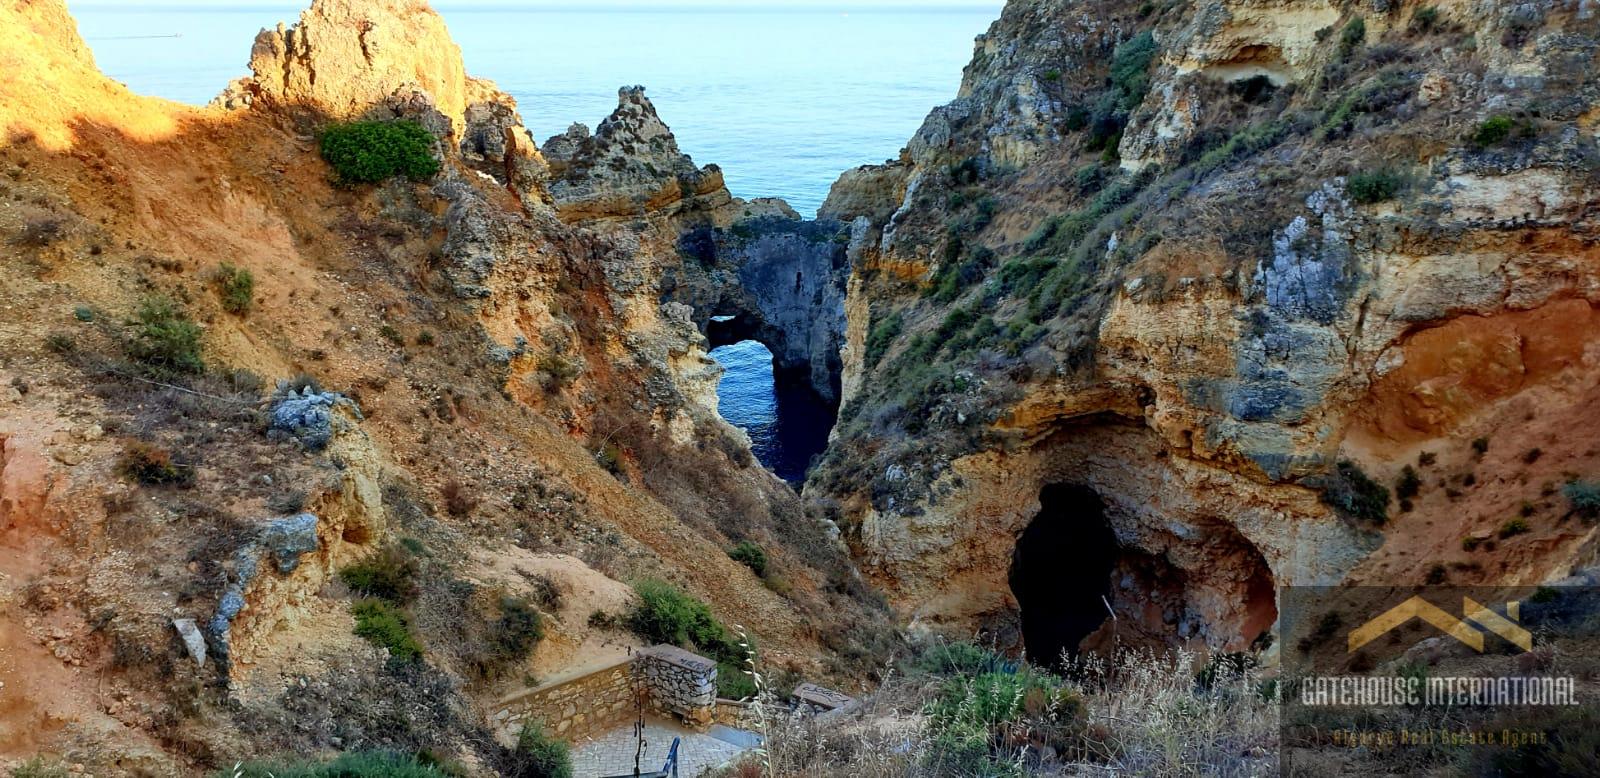 The Top Ten Most Interesting Facts About The Algarve